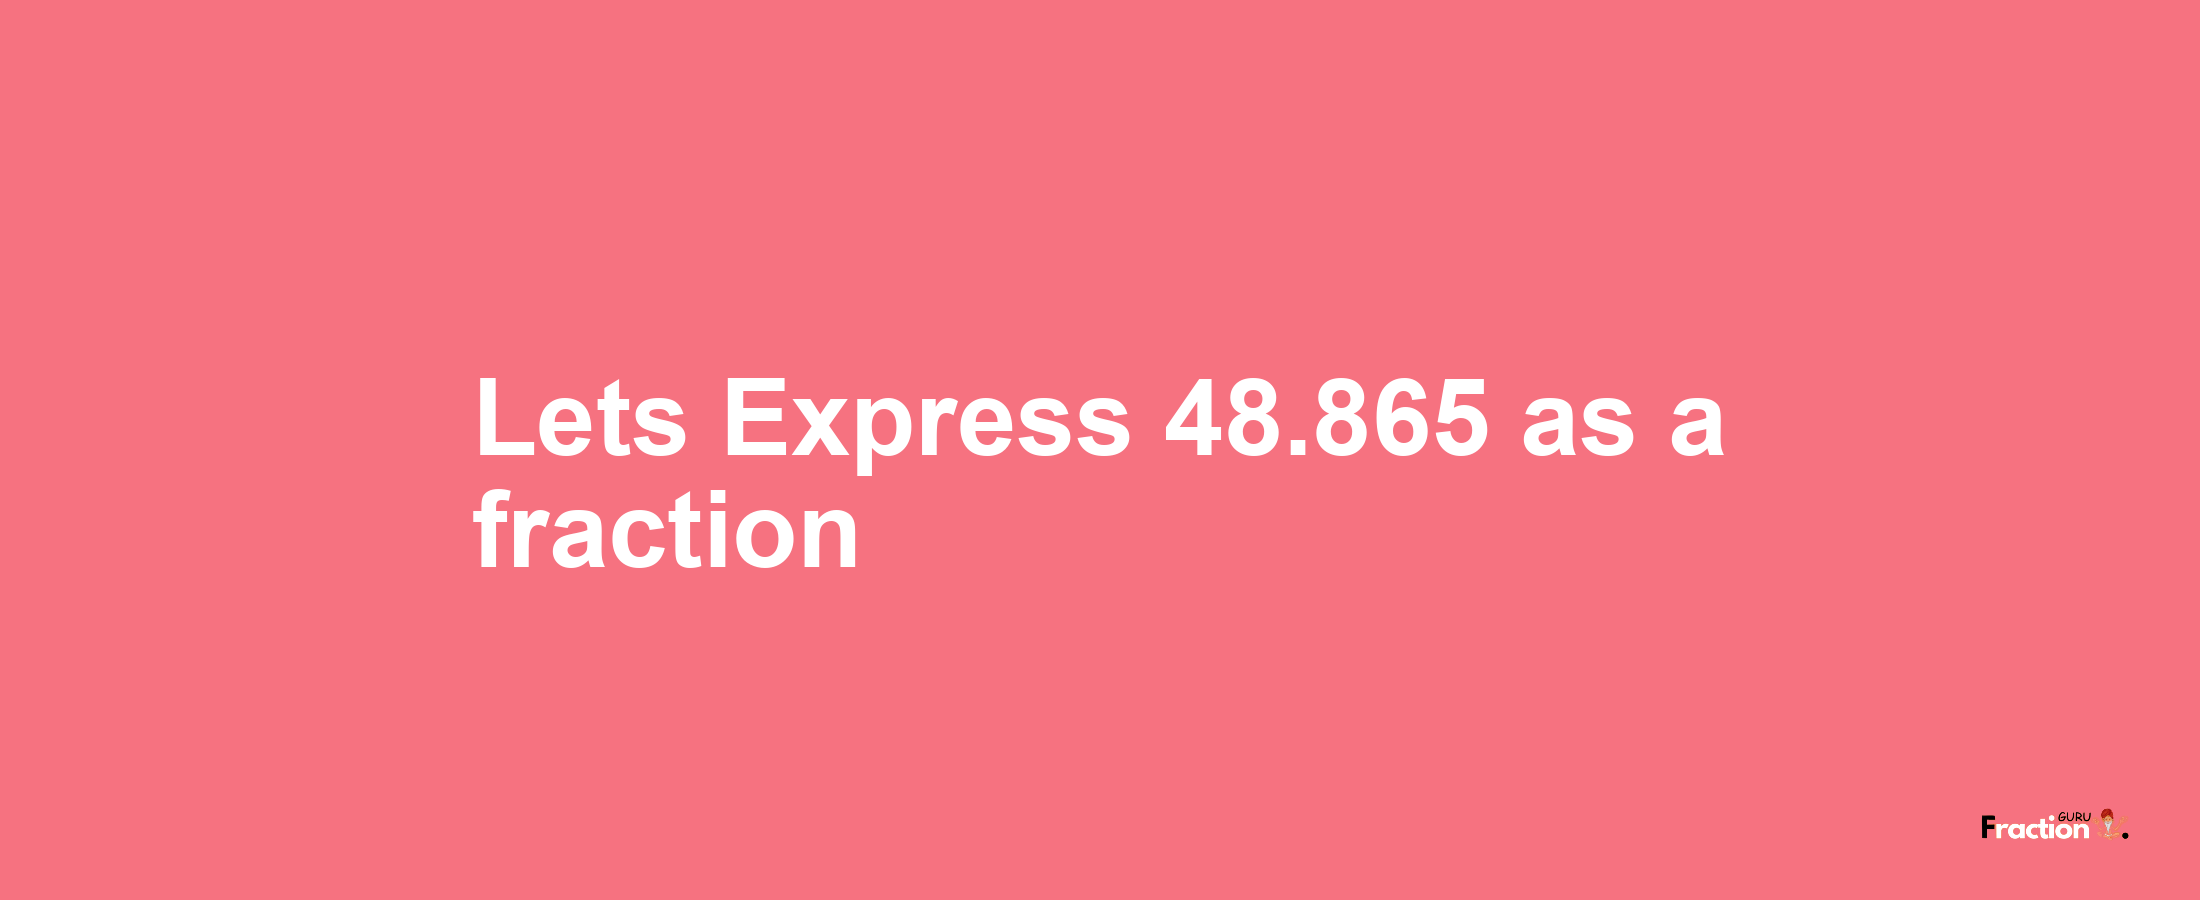 Lets Express 48.865 as afraction